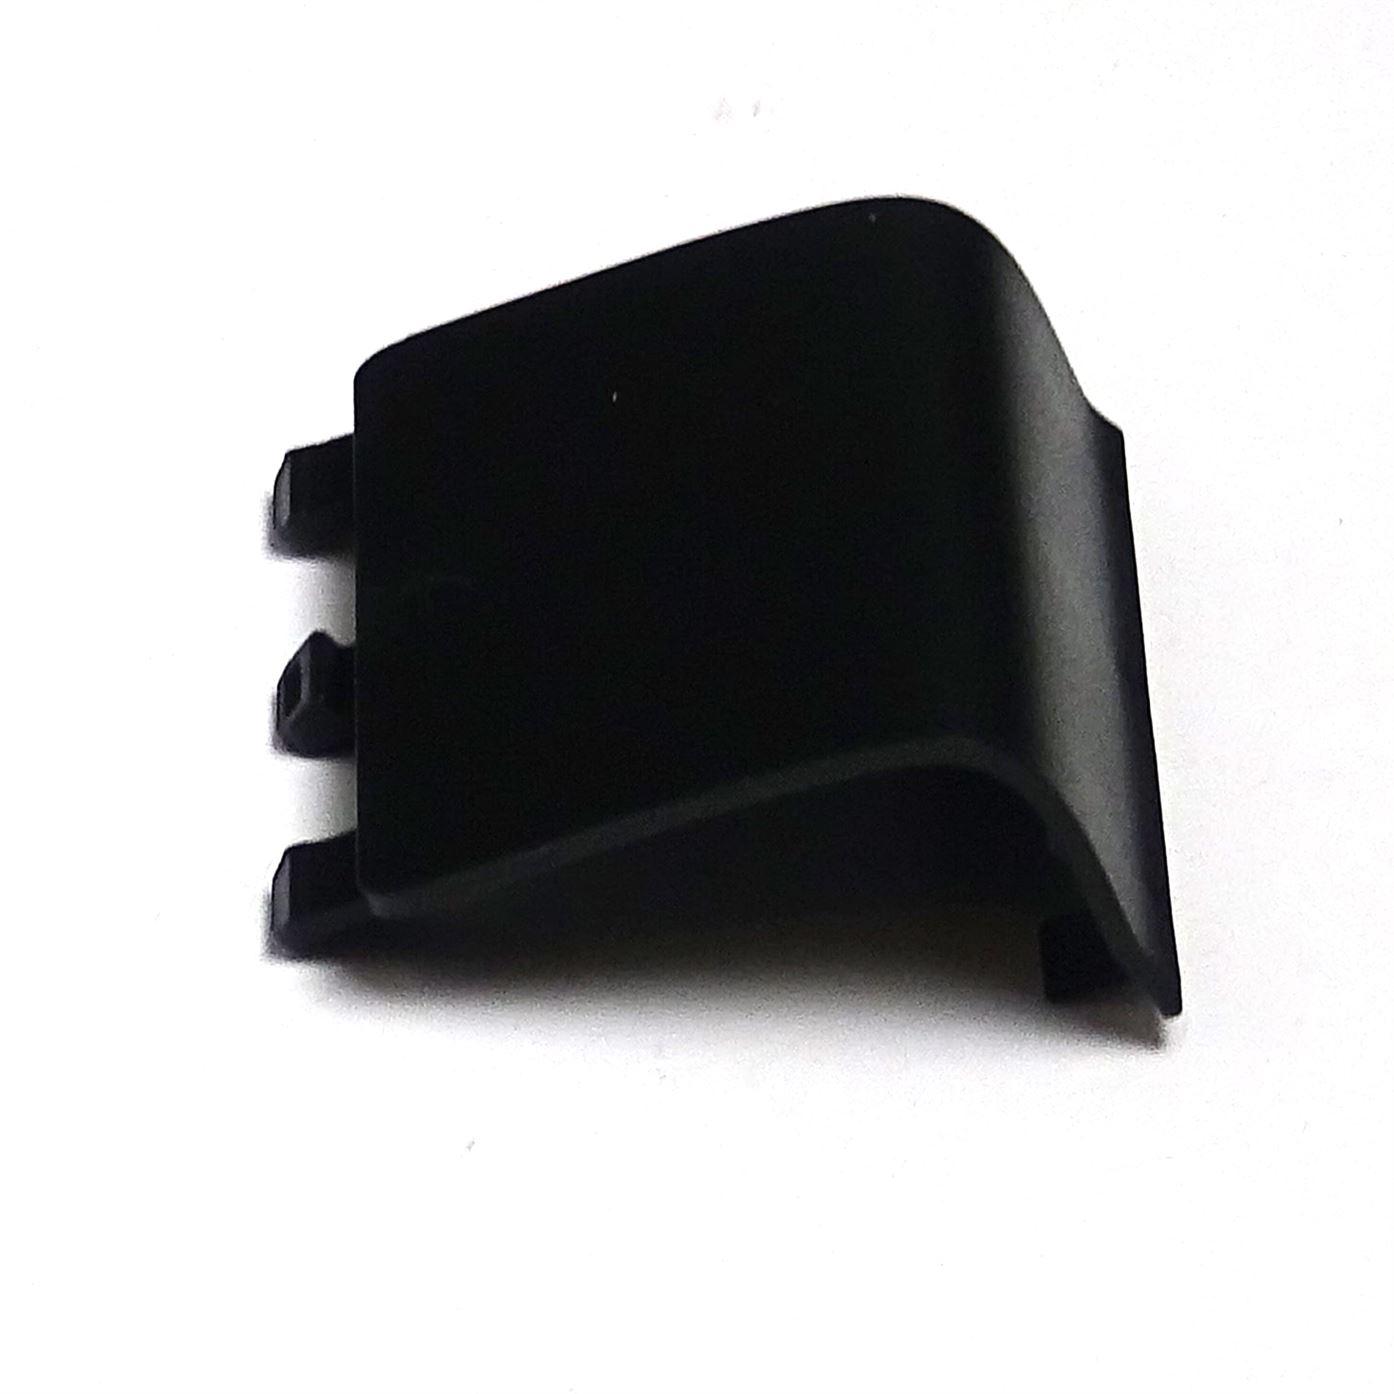 Battery Cover Door Shell Replacement for XBOX One Wireless Controller BLACK - UK Seller